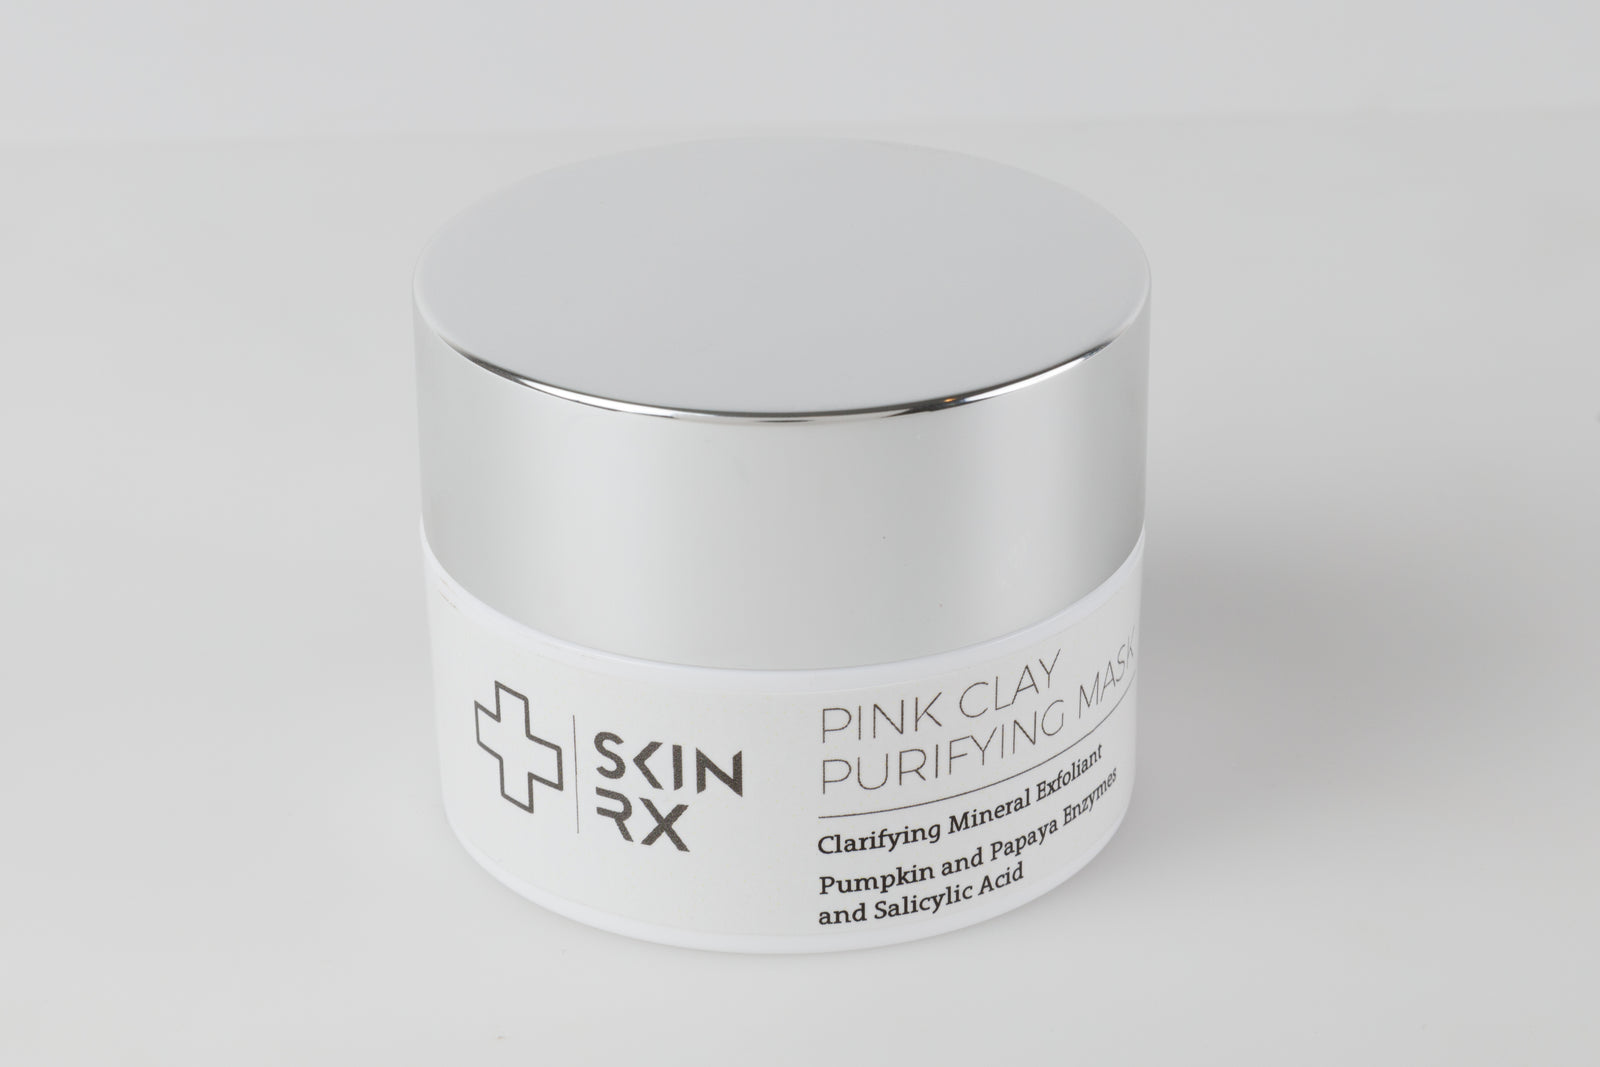 Pink Clay Purifying Mask